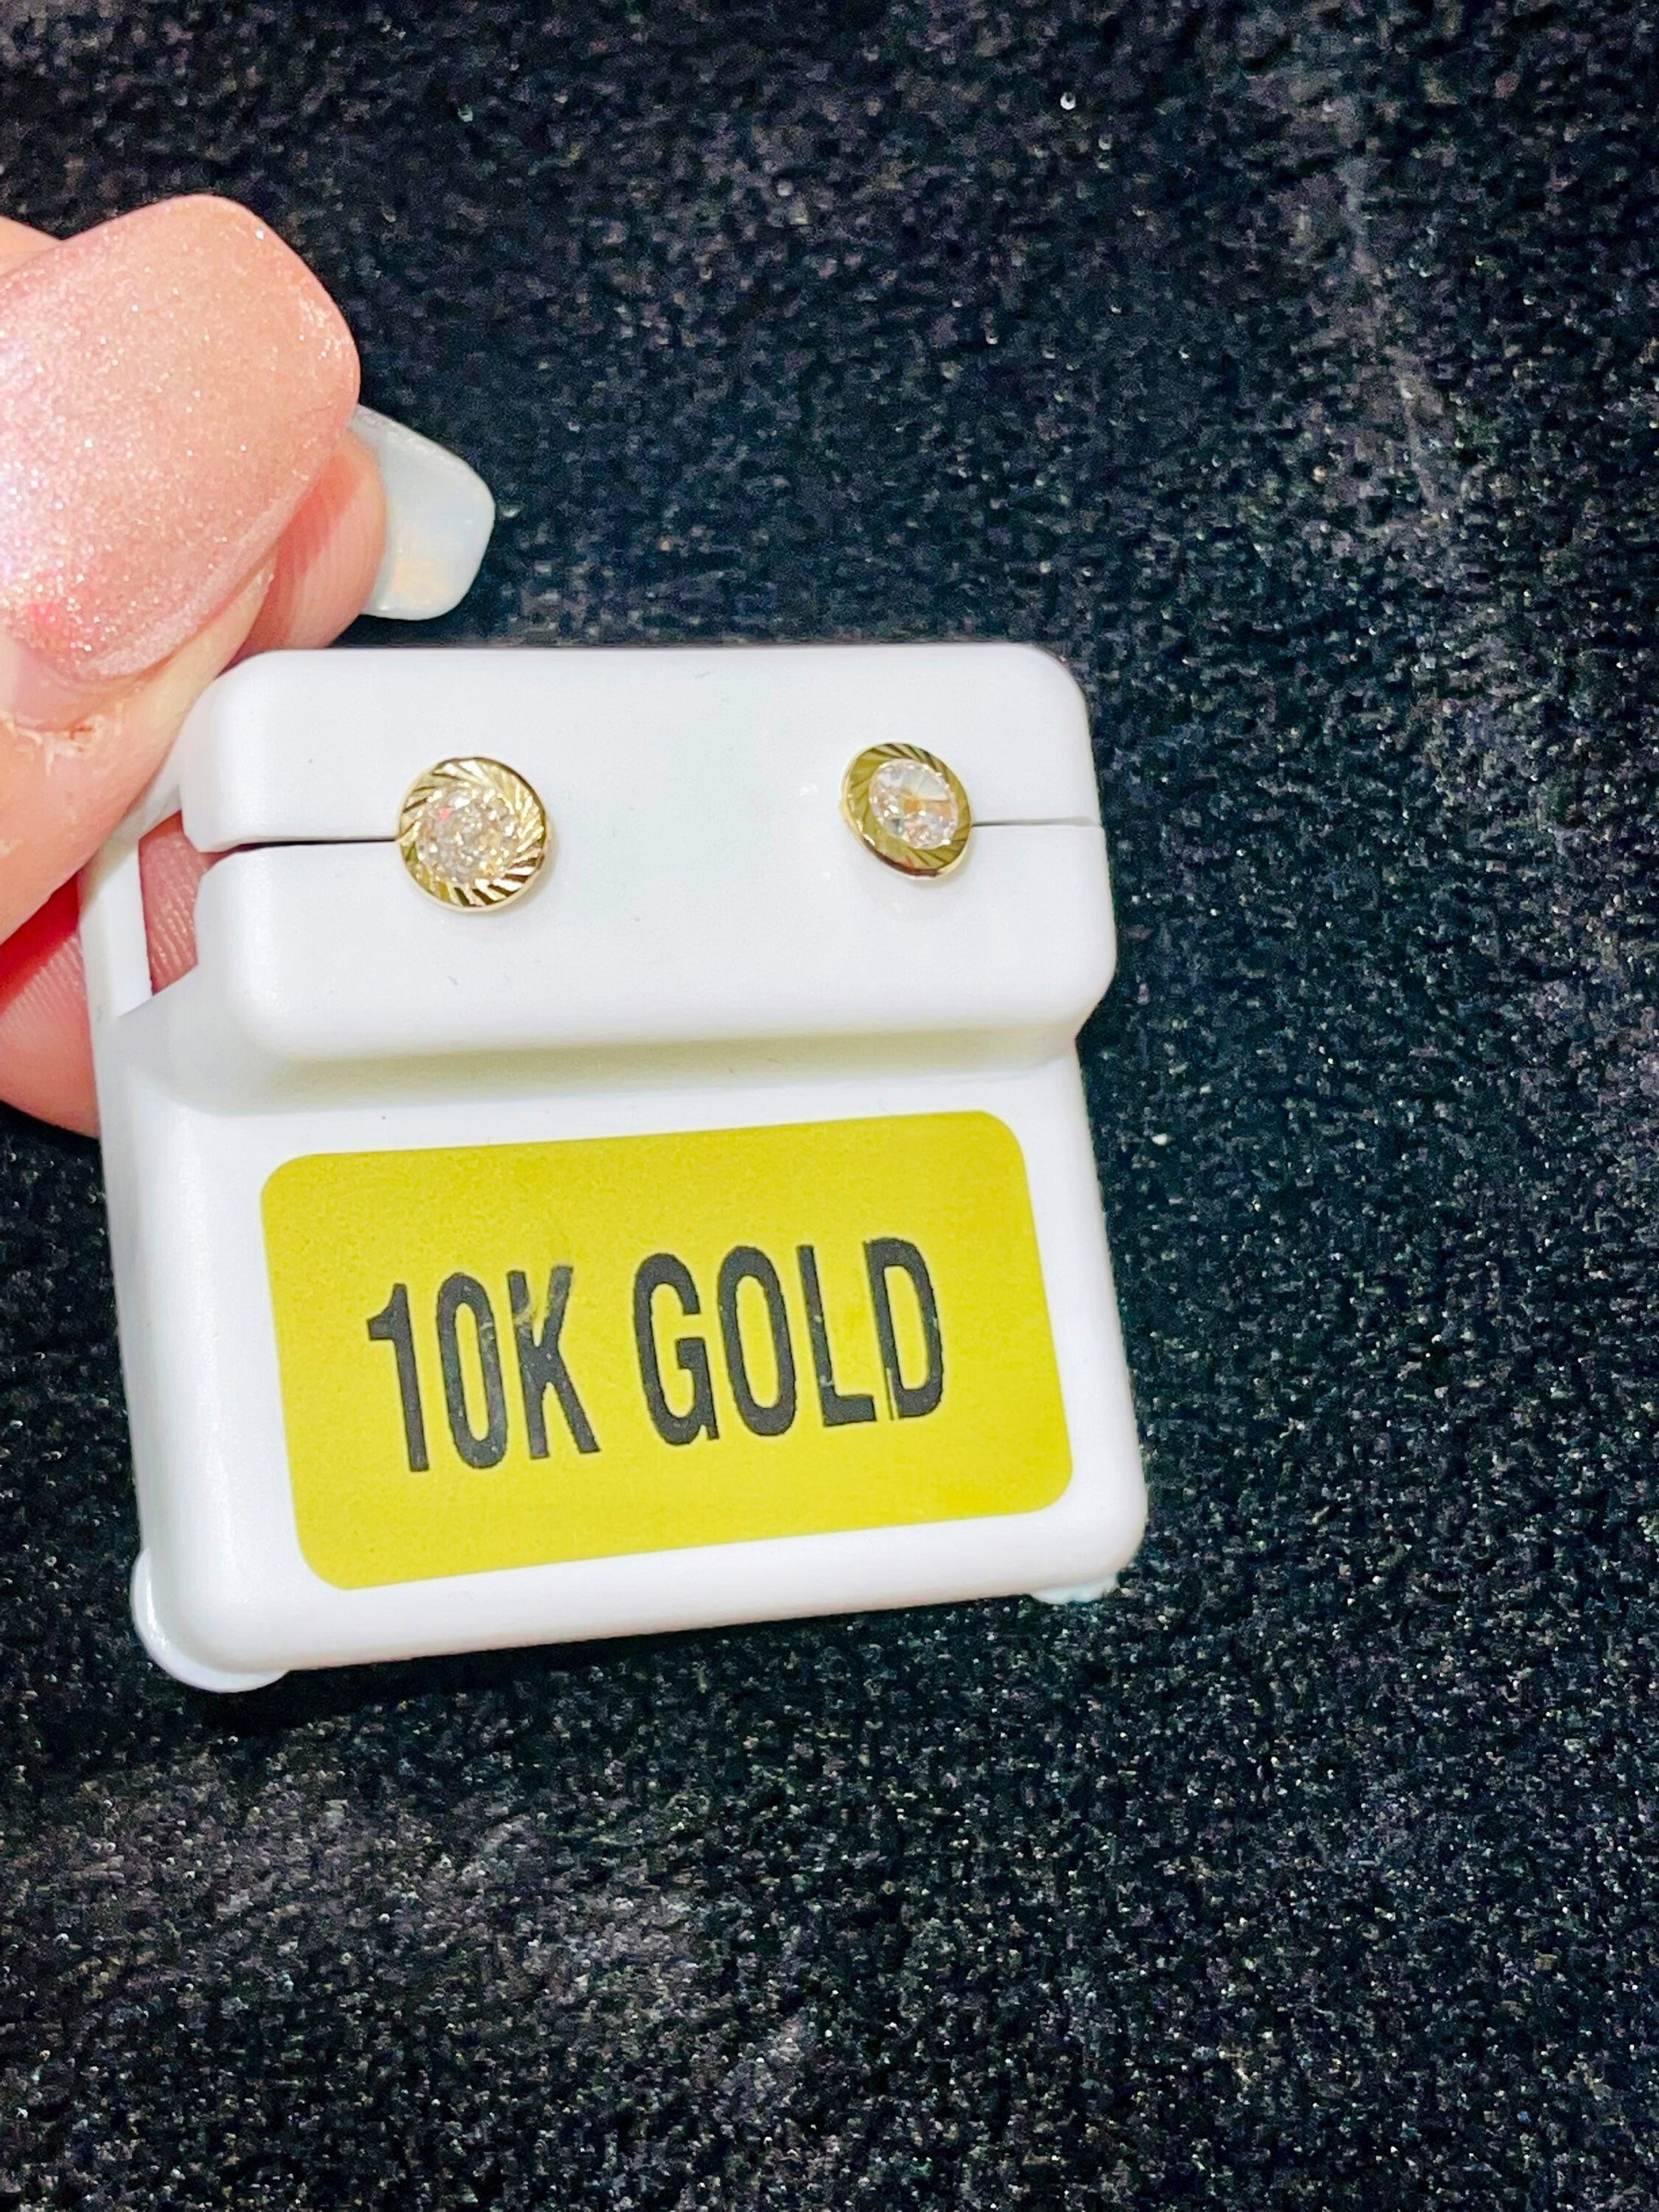 10k solid gold round studs, beautifully designed for everyday wear, eat gif for all occasions, all ages, unisex, Huge sale, Free gift wrap,